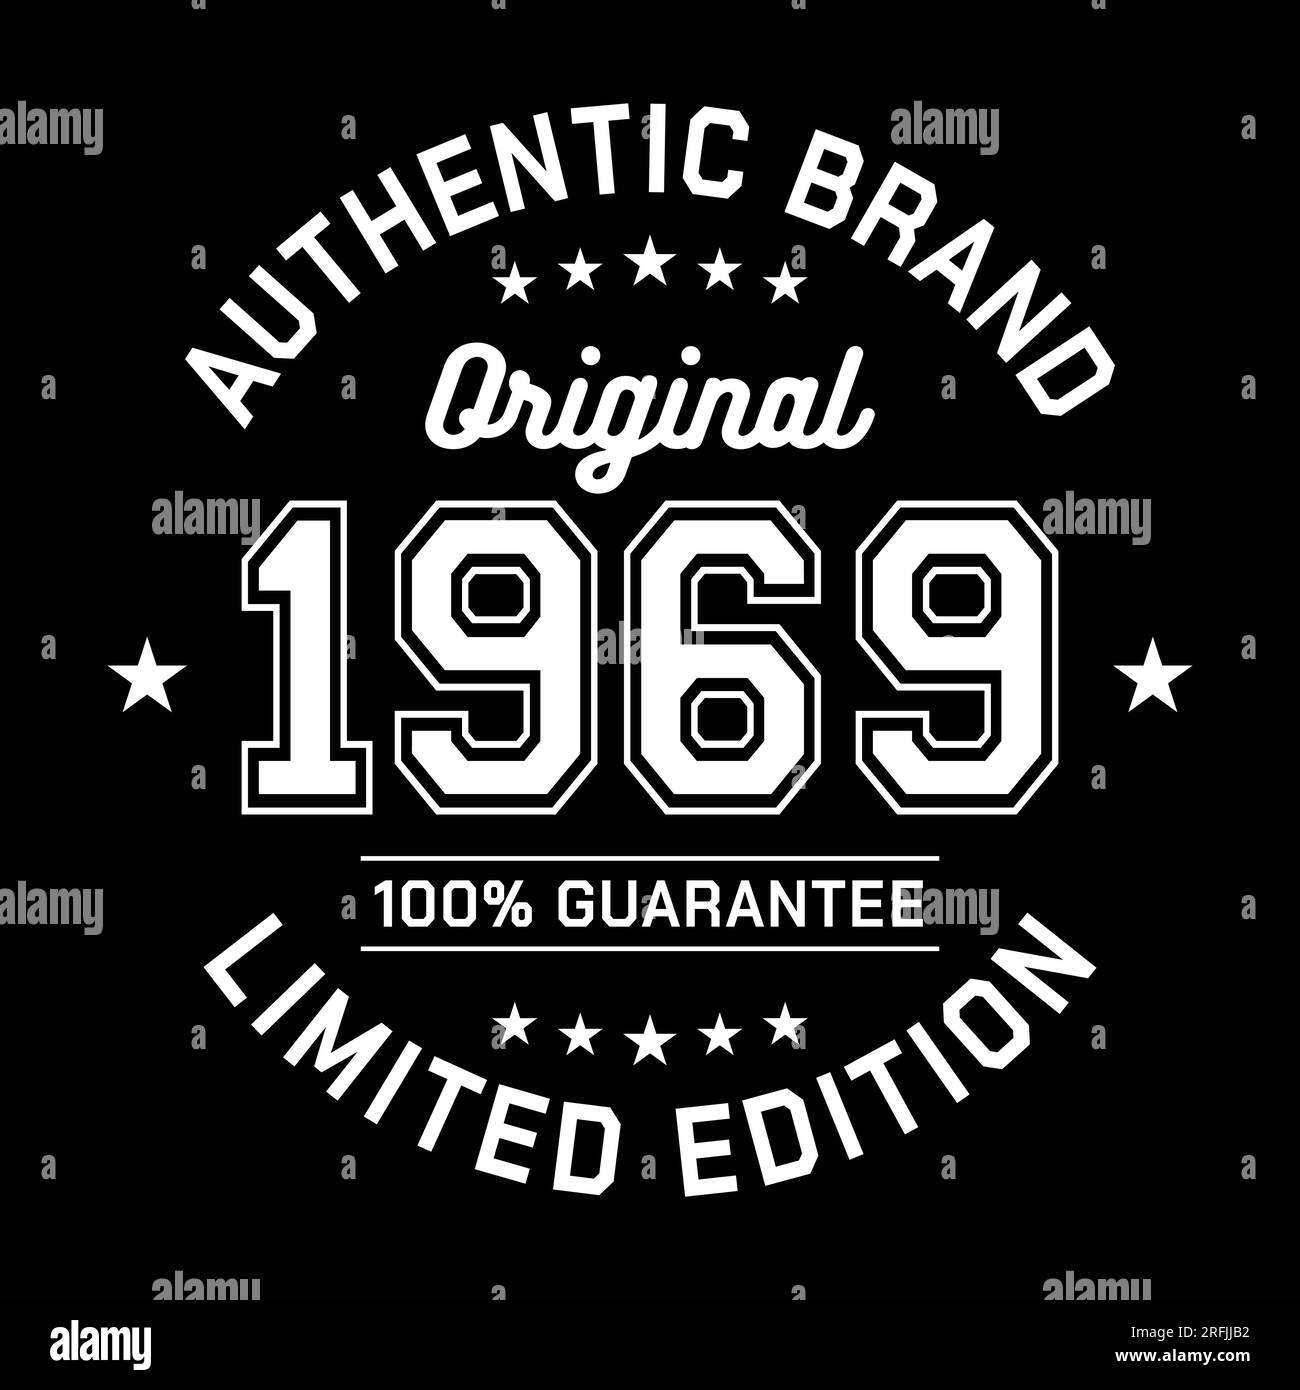 Authentic brand. Original 1969. Limited Edition. Authentic T-Shirt Design. Vector and Illustration. Stock Vector